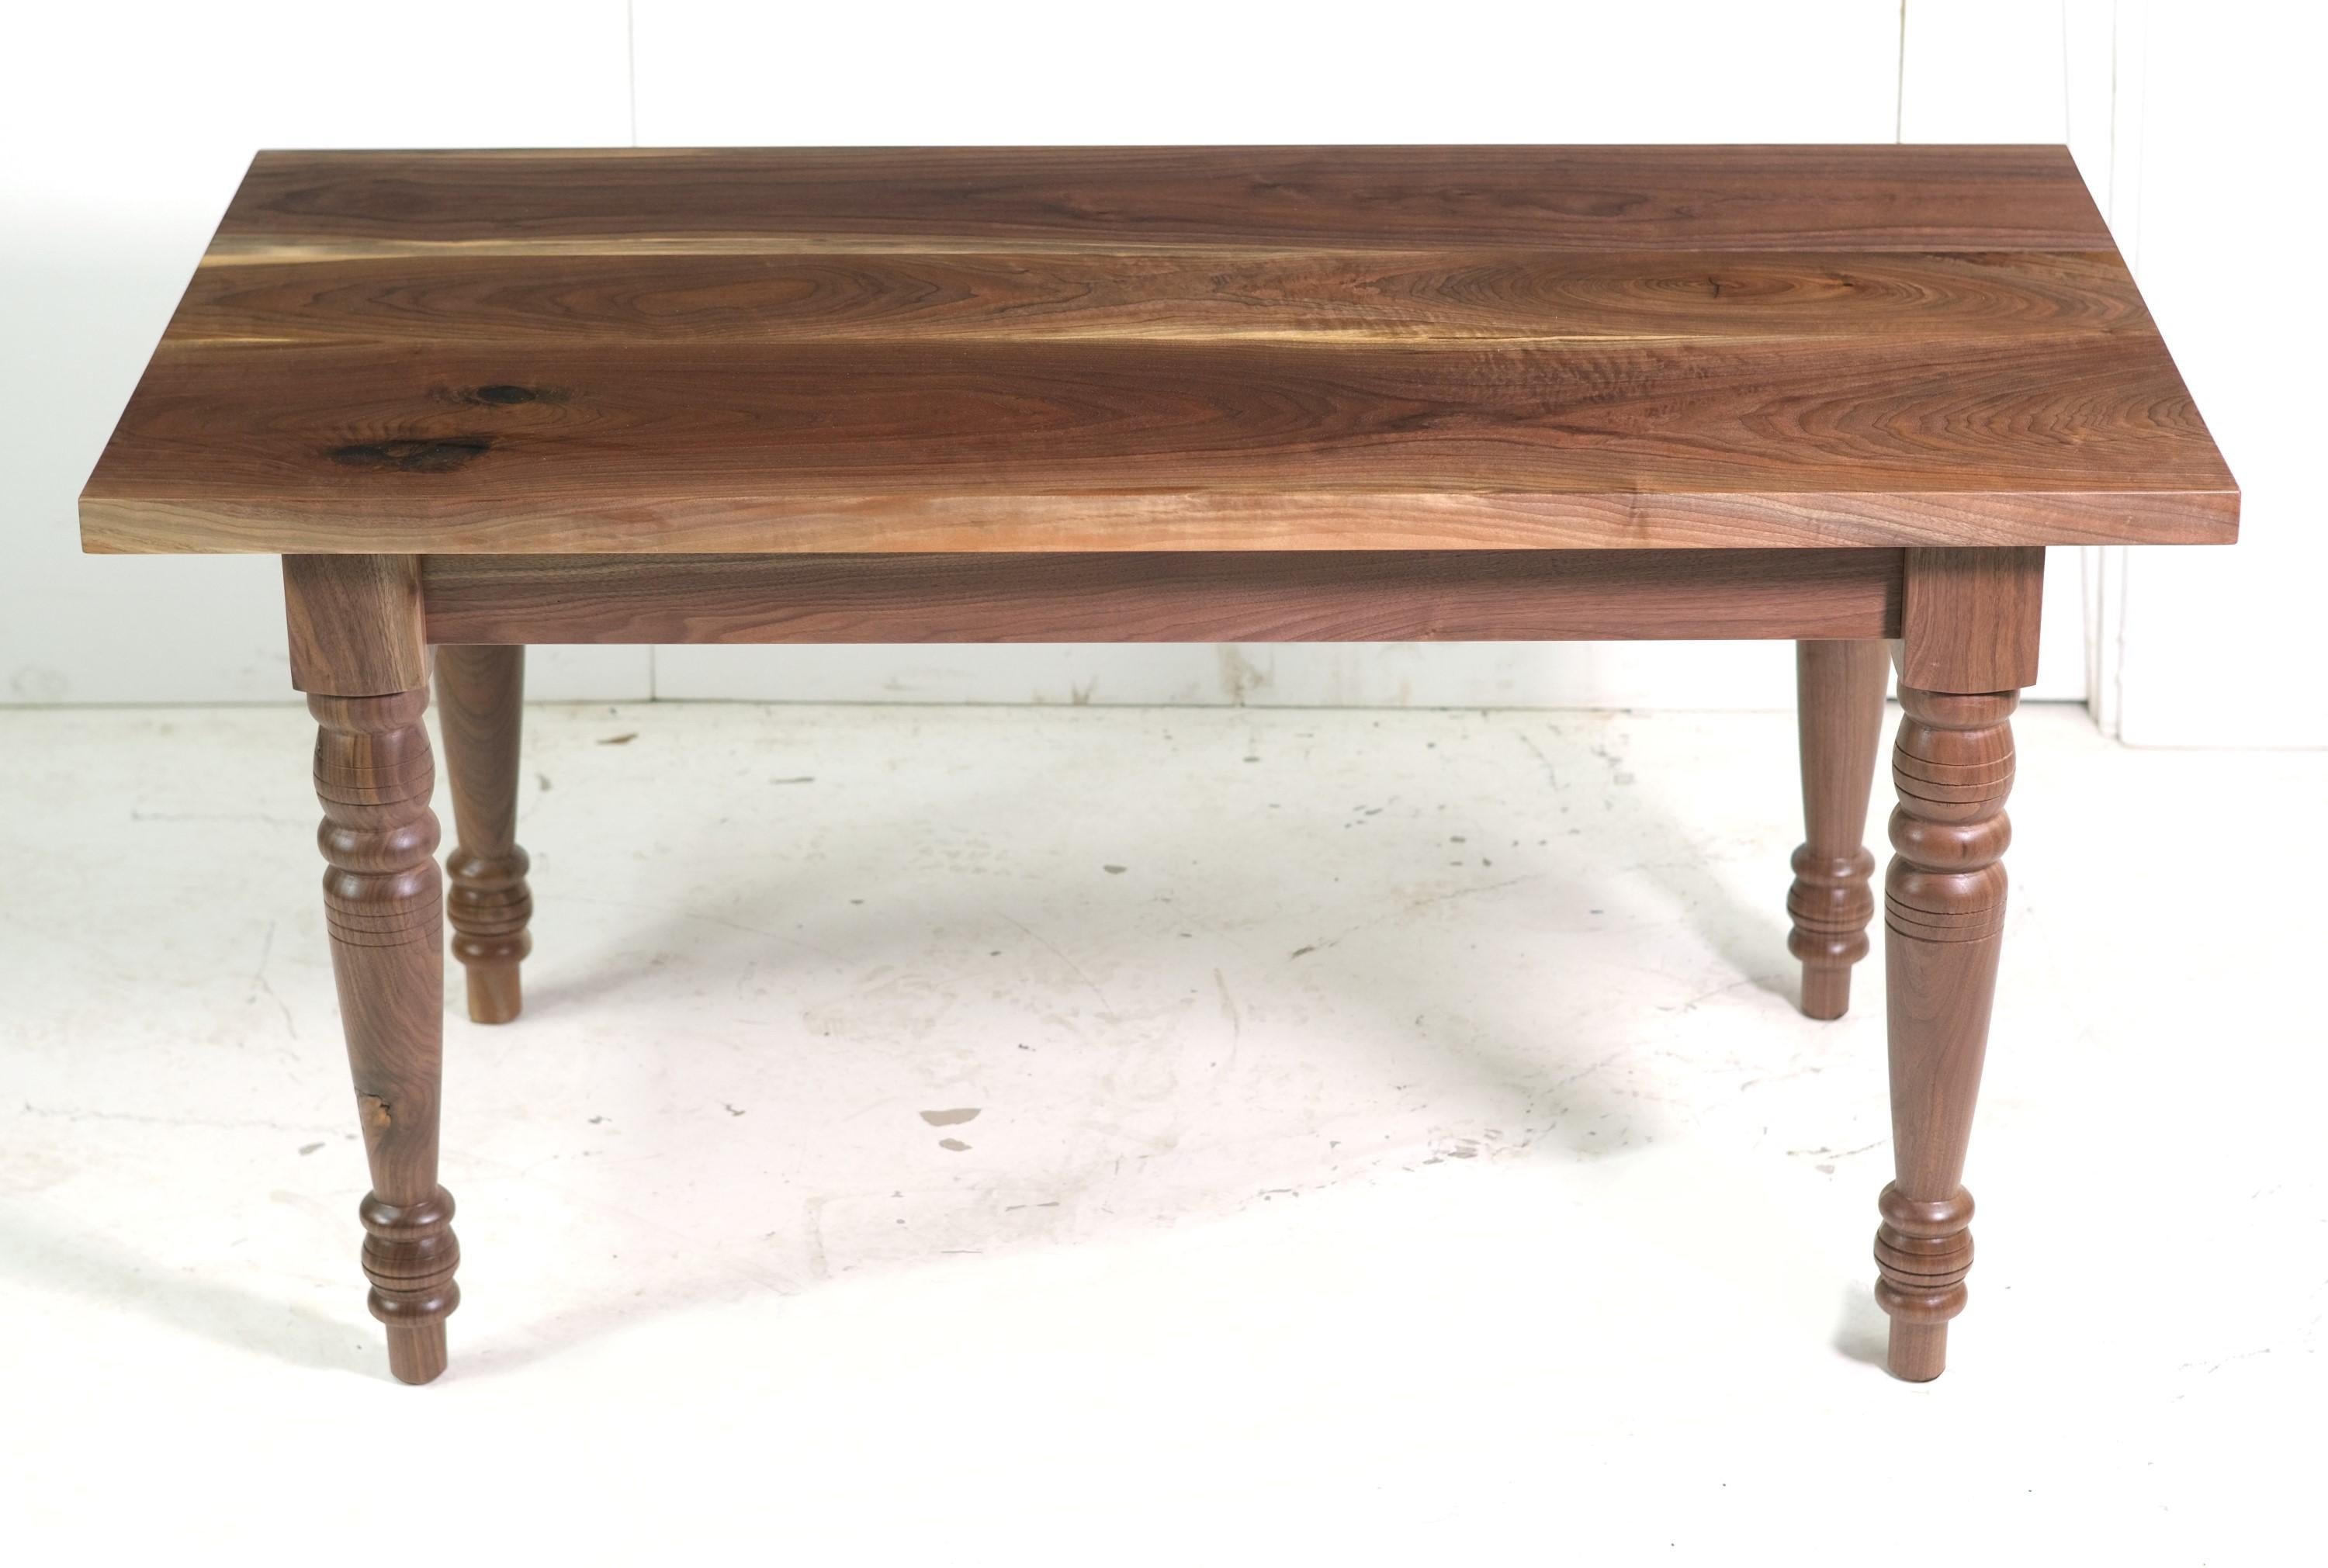 Solid walnut table features a three piece walnut top complete with turned legs. Satin finish. Please note, this item is located in our Scranton, PA location.